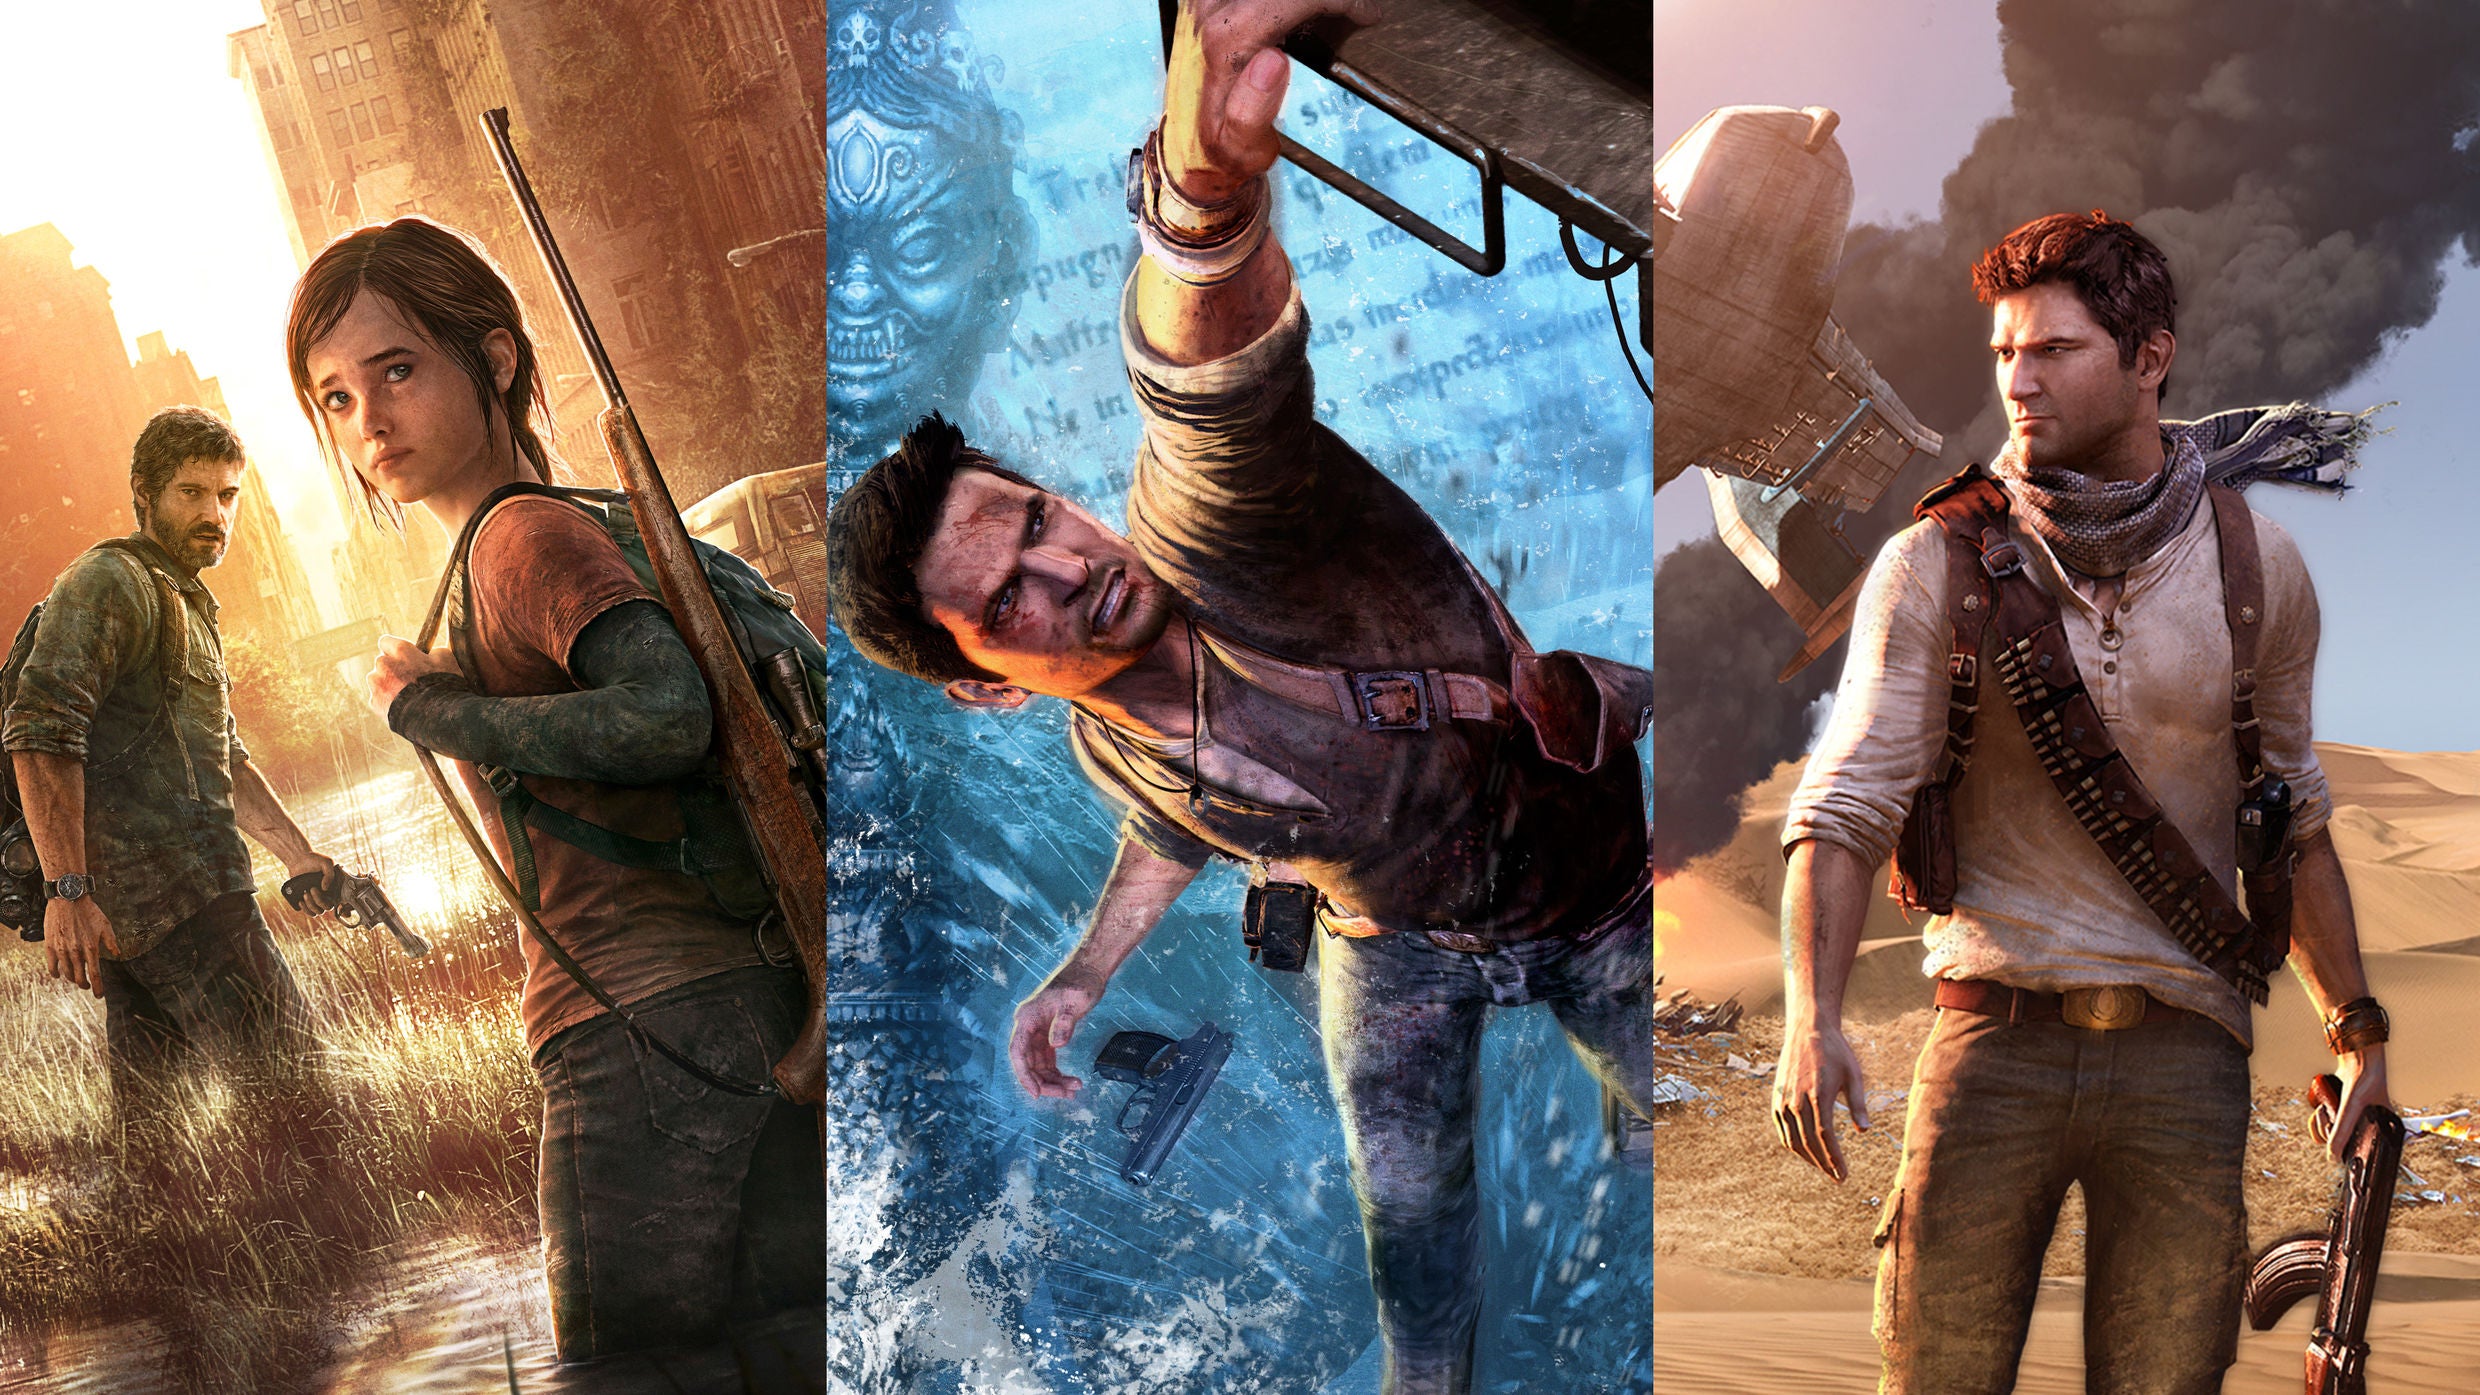 Image for PS3 multiplayer servers for The Last of Us, Uncharted 2, Uncharted 3 being taken offline